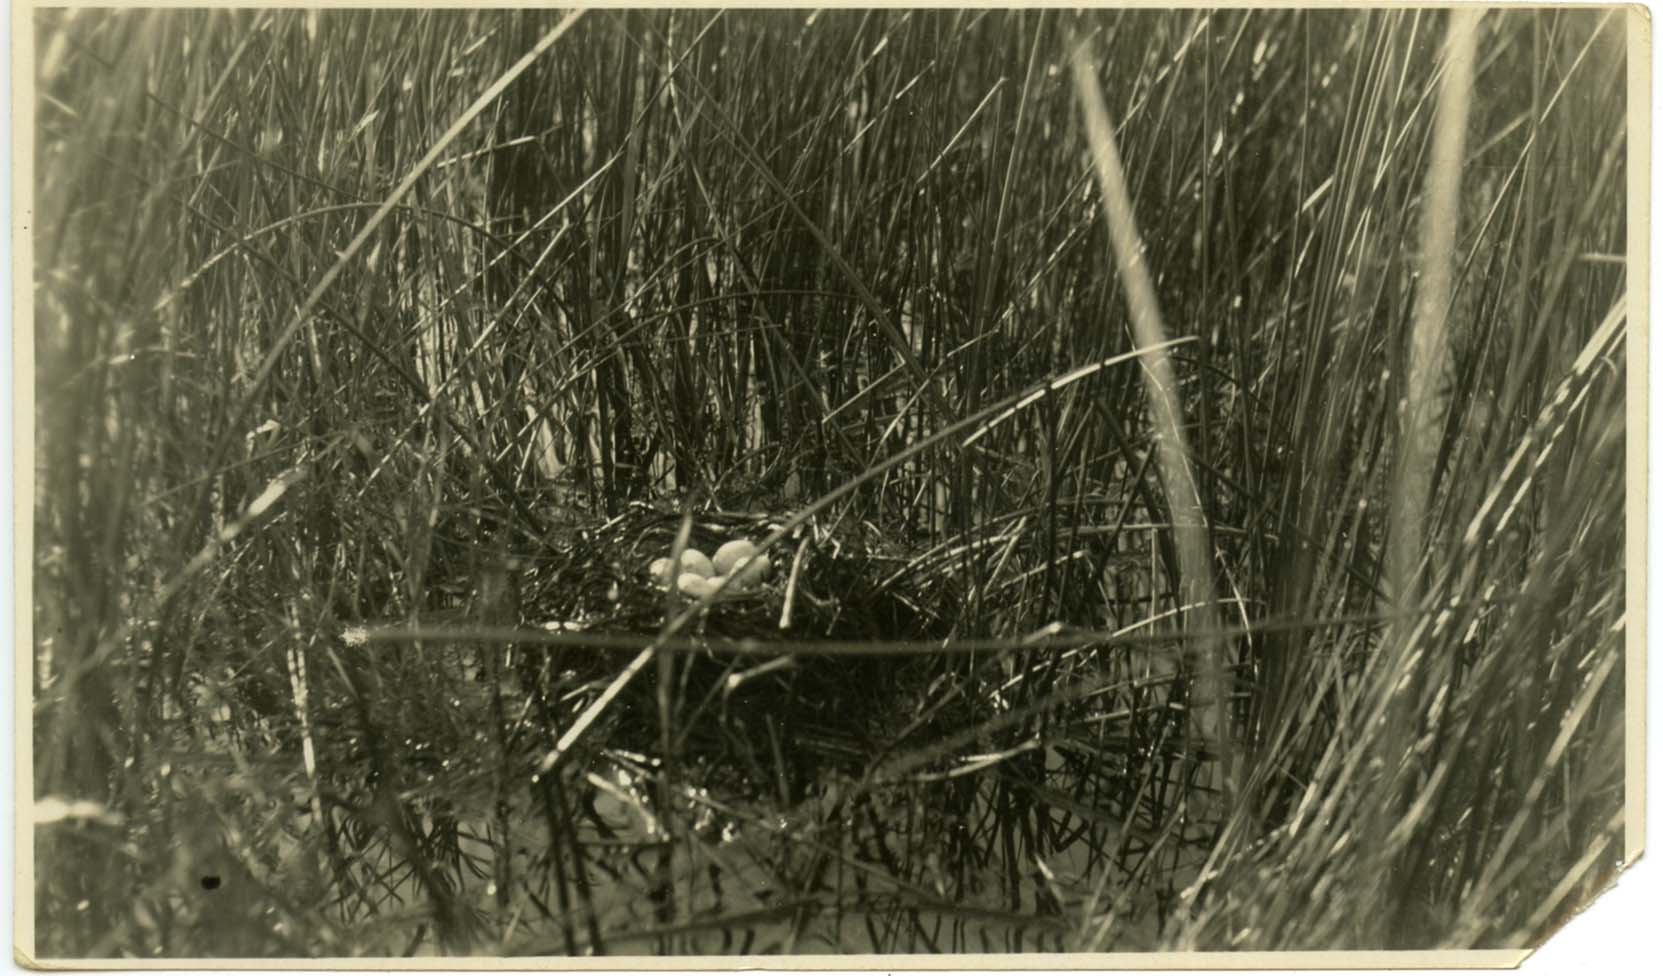 Photograph of eggs in a Pied-billed Grebe nest